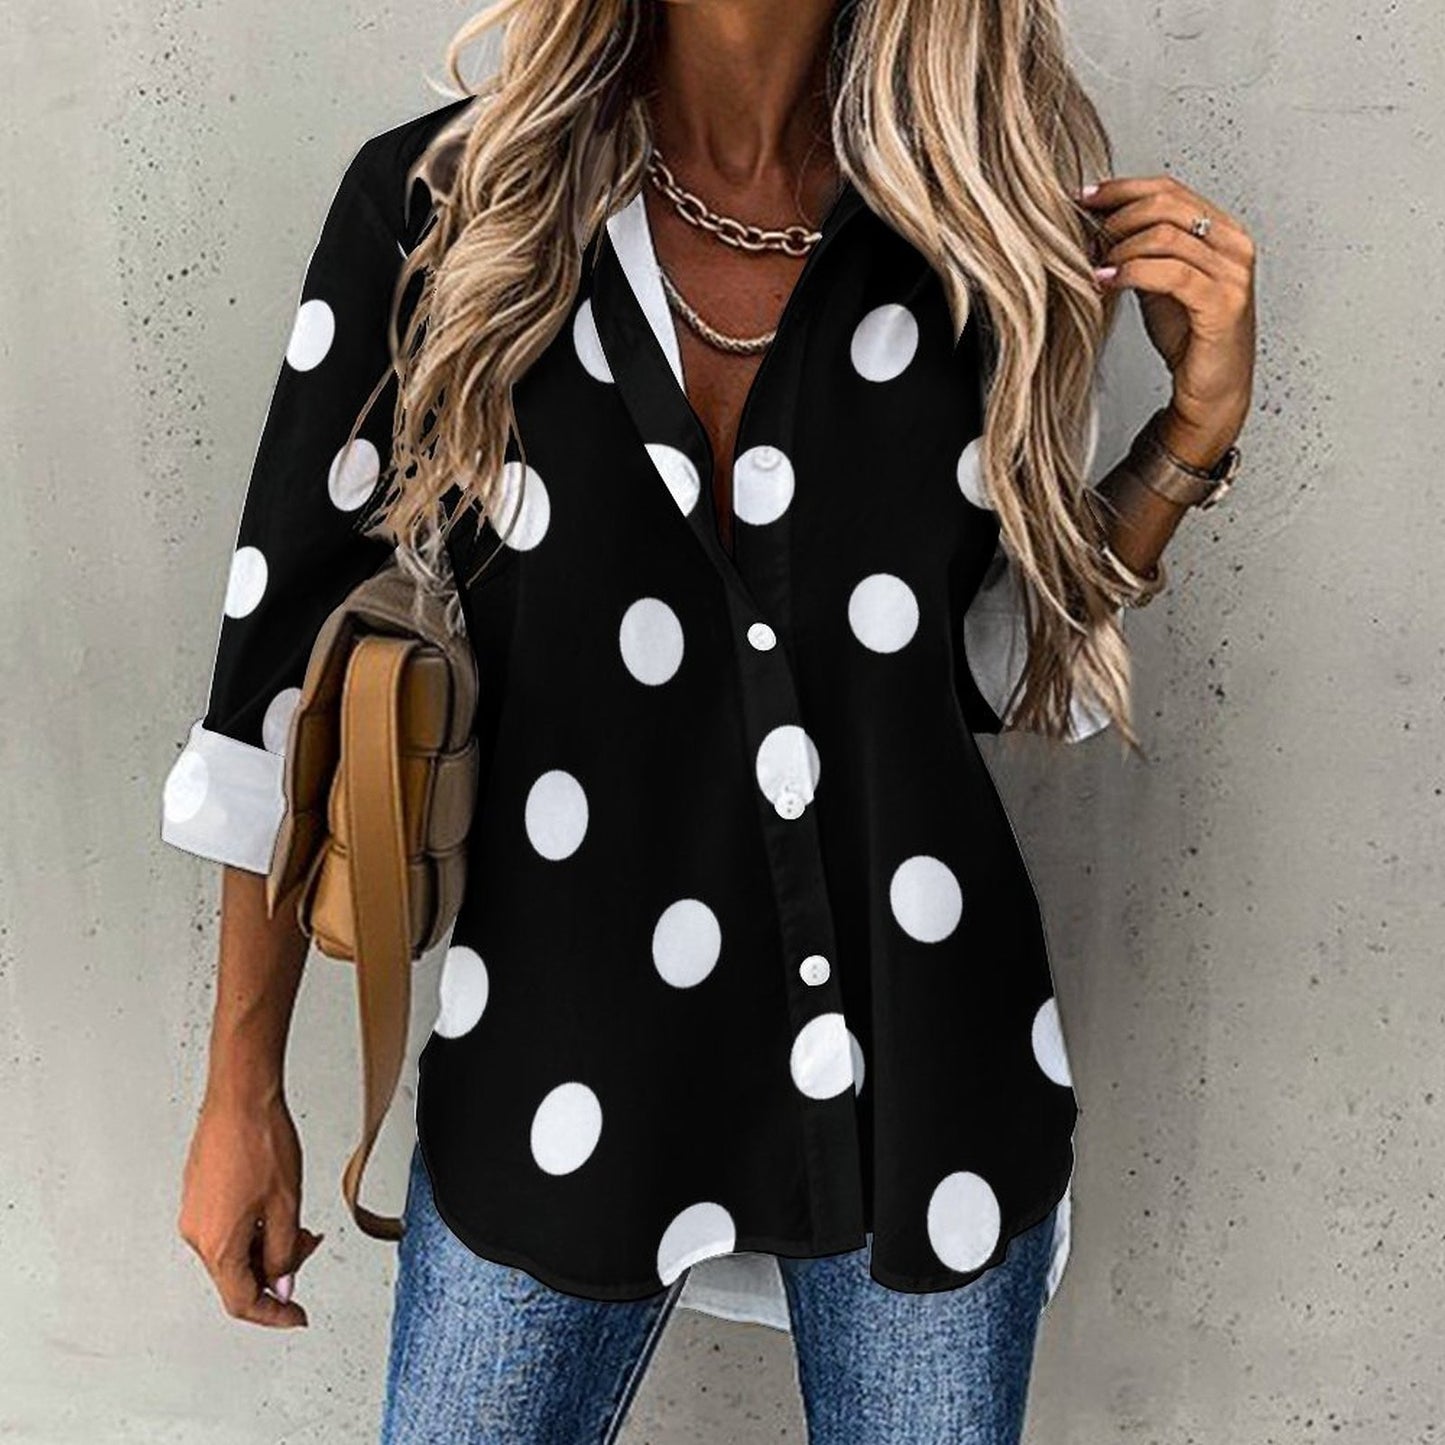 Black With White Polka Dots Long Sleeve Button Up Blouse